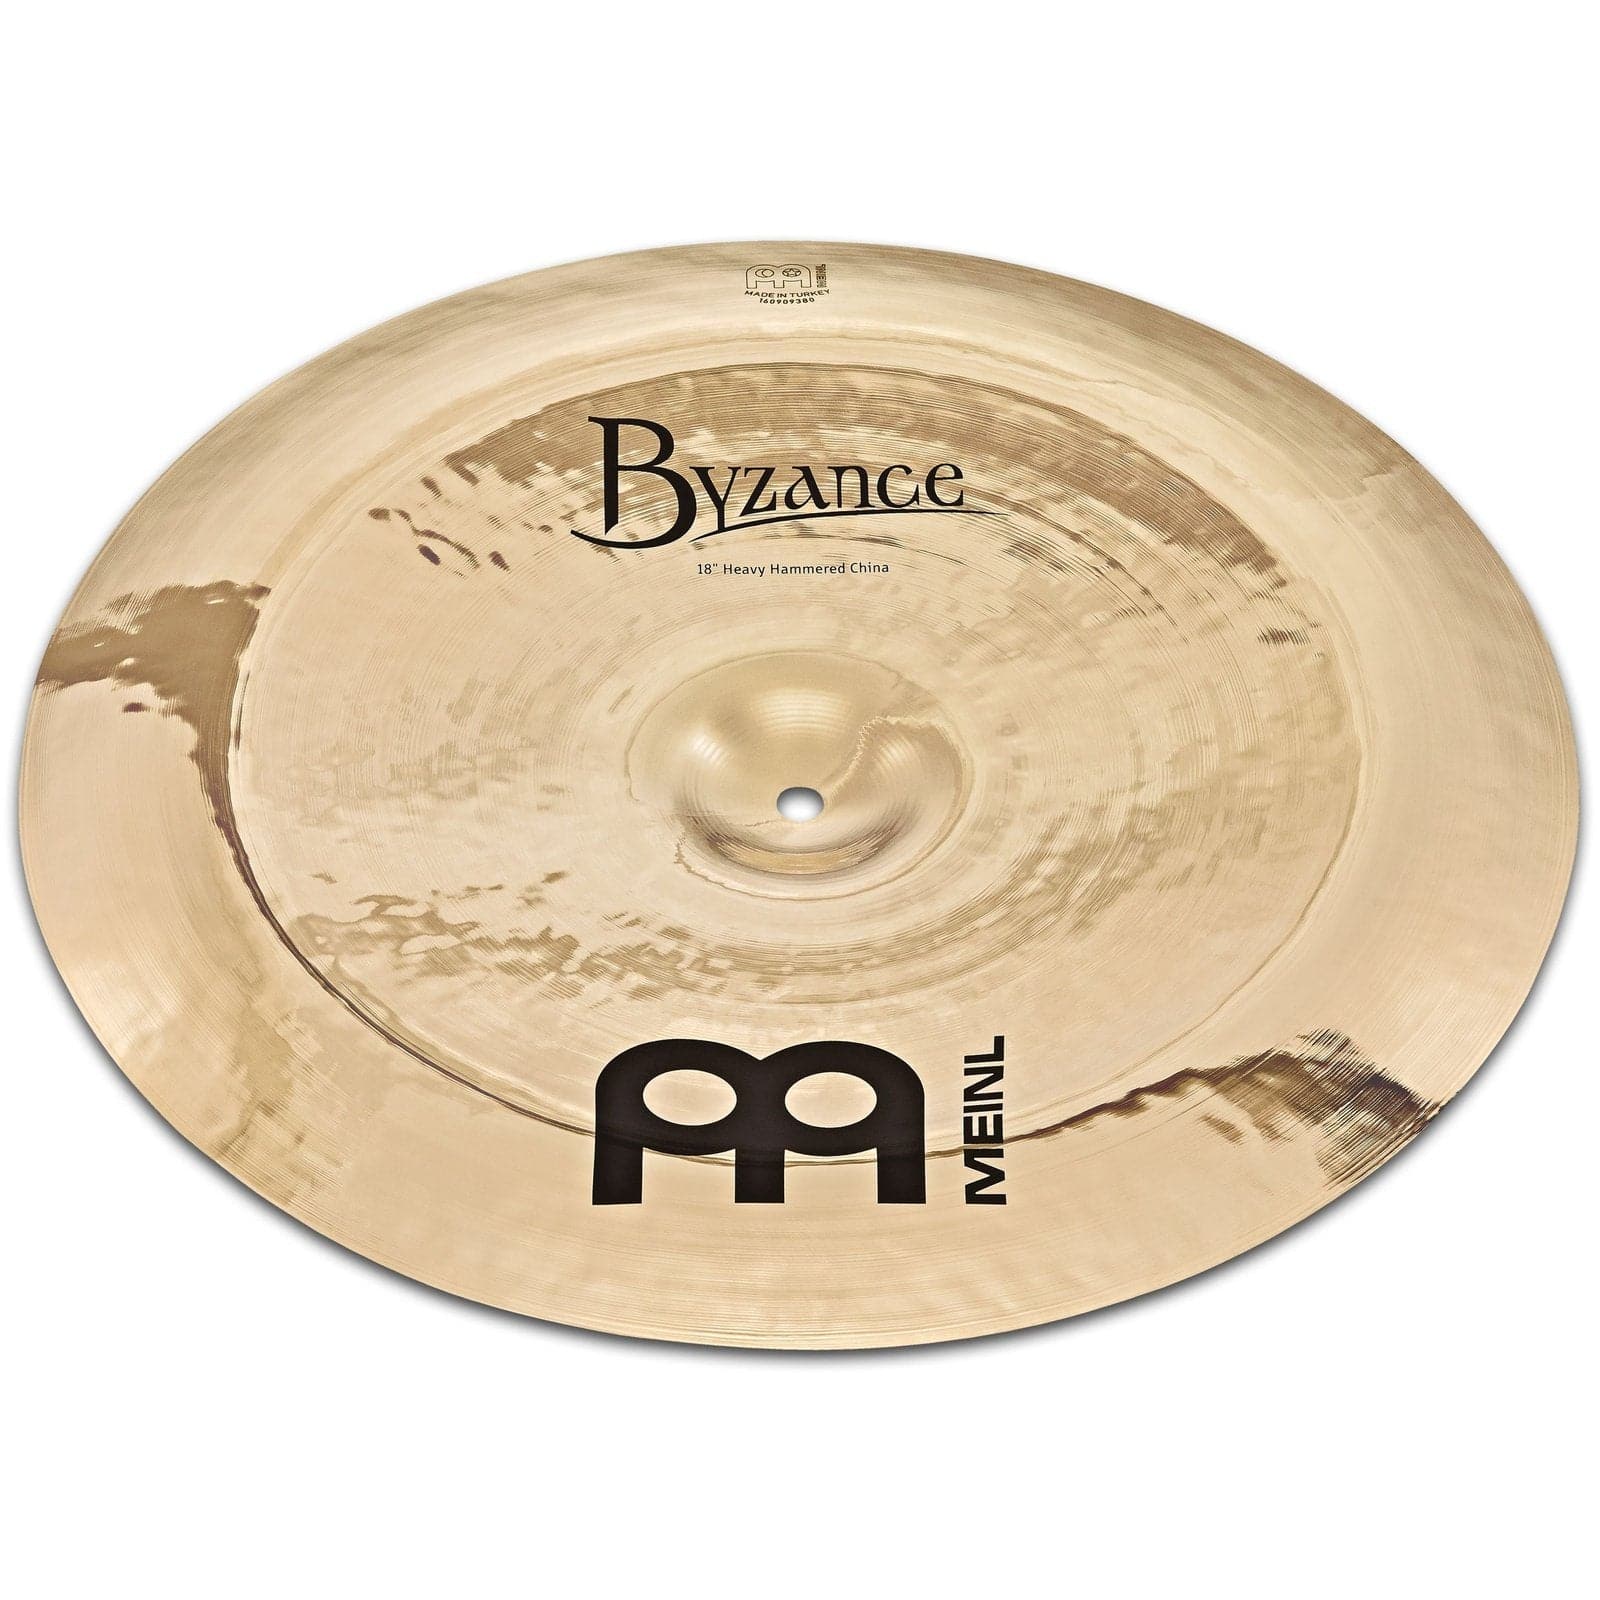 Meinl Byzance Brilliant Heavy Hammered China Cymbal 20